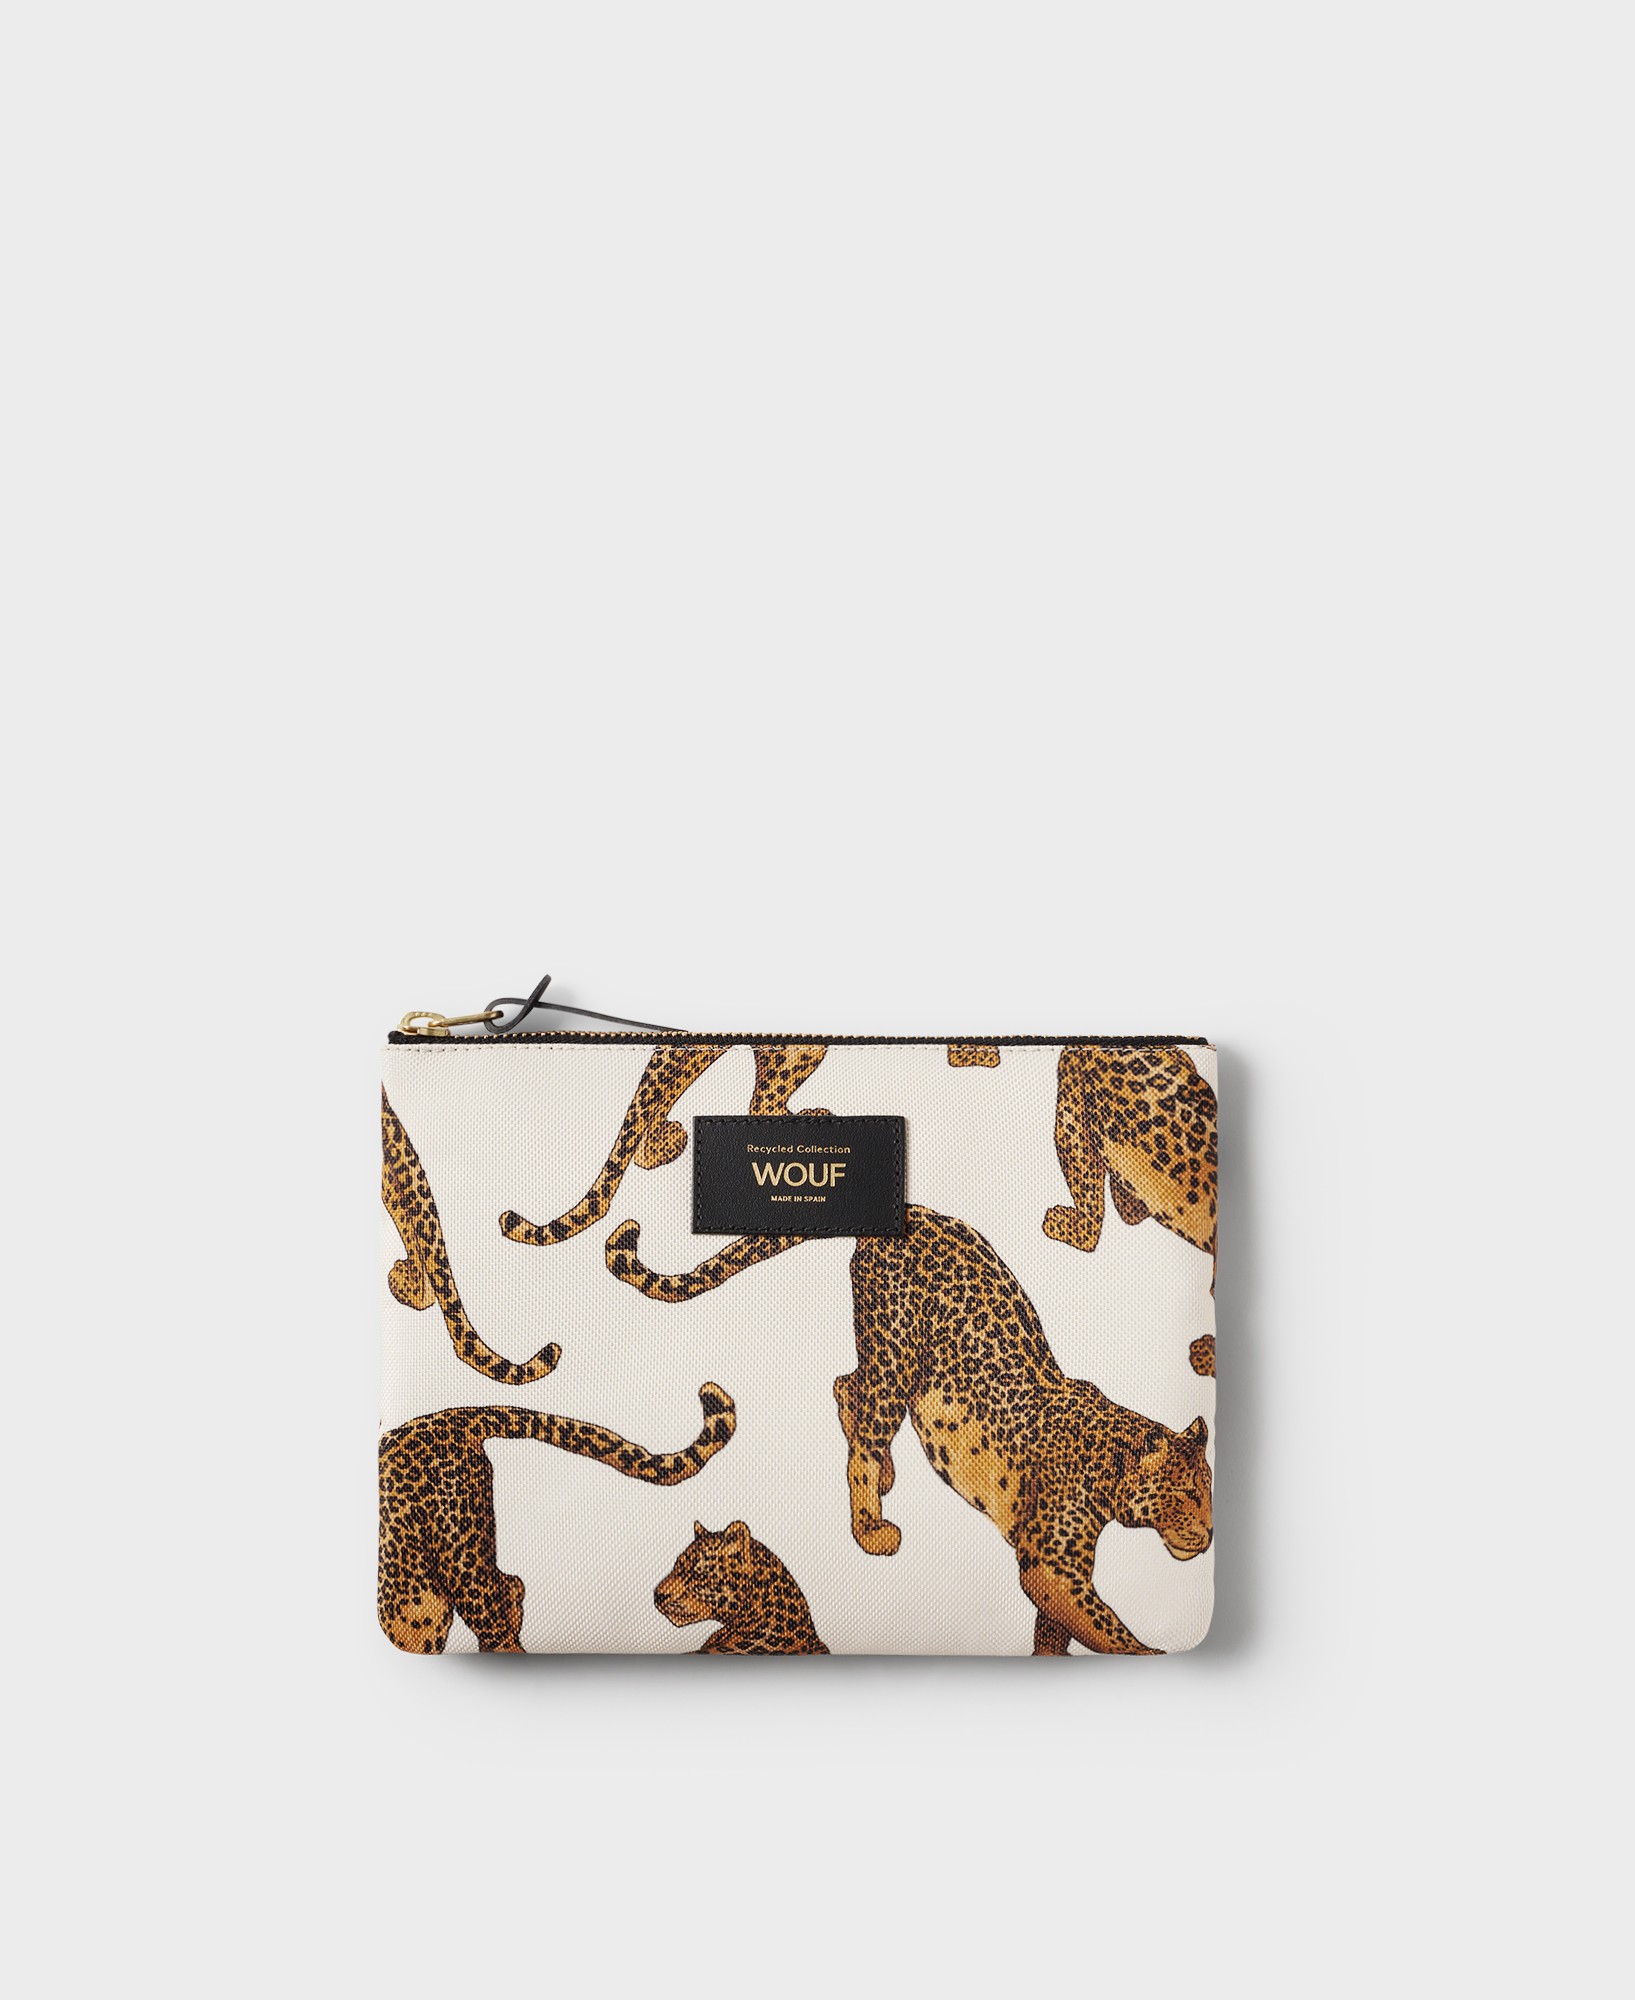 wouf-the-leopard-pouch